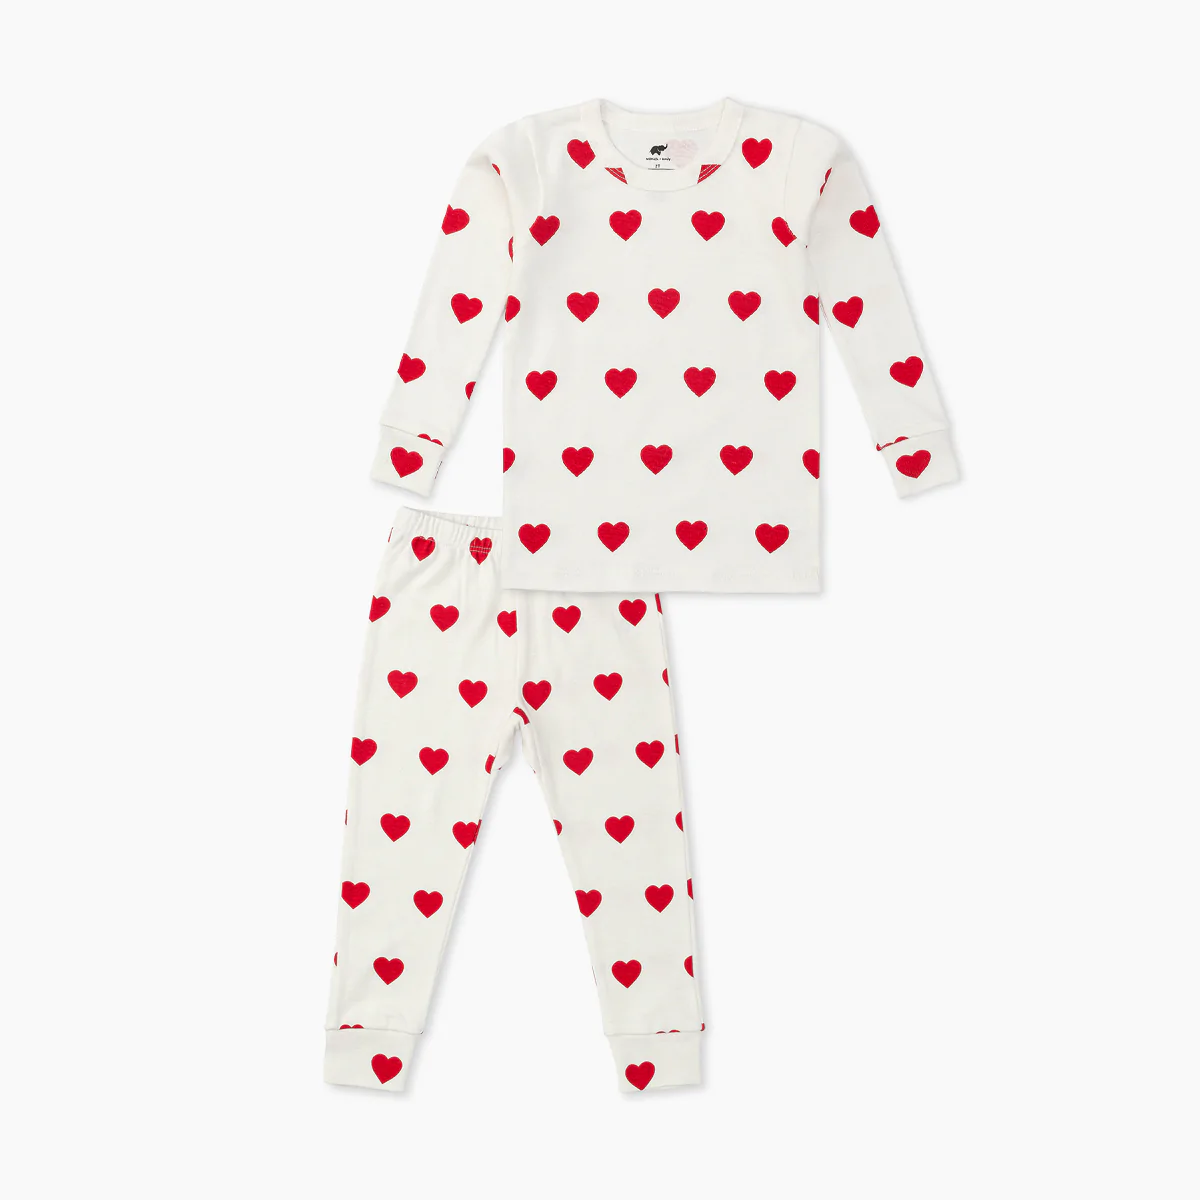 Monica + Andy Red Hearts Pajamas